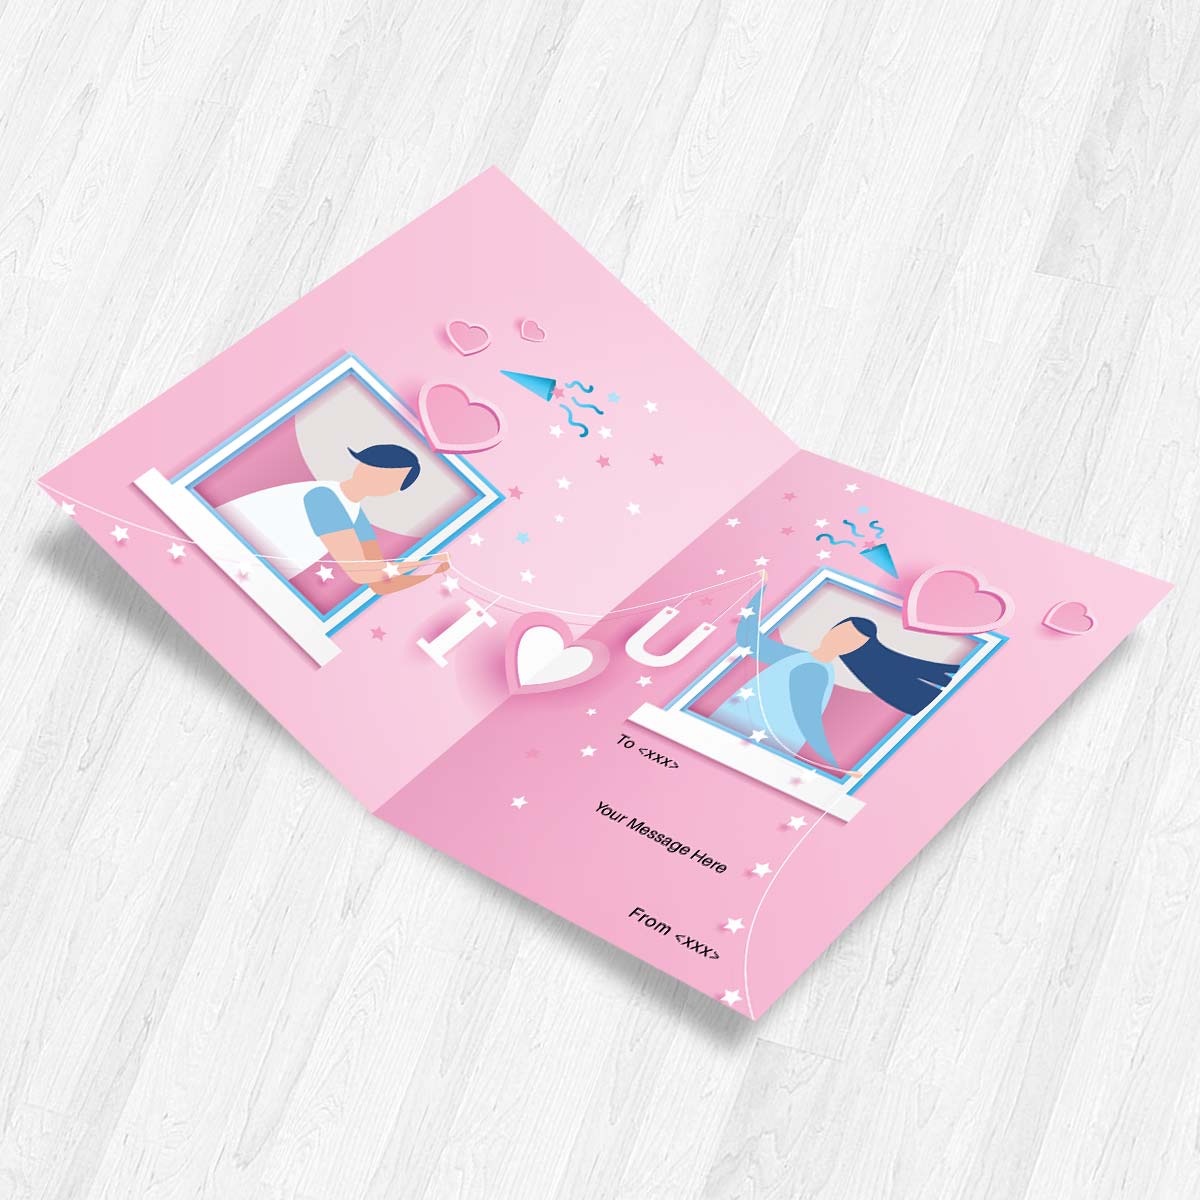 Personalised I Love You Greeting Card